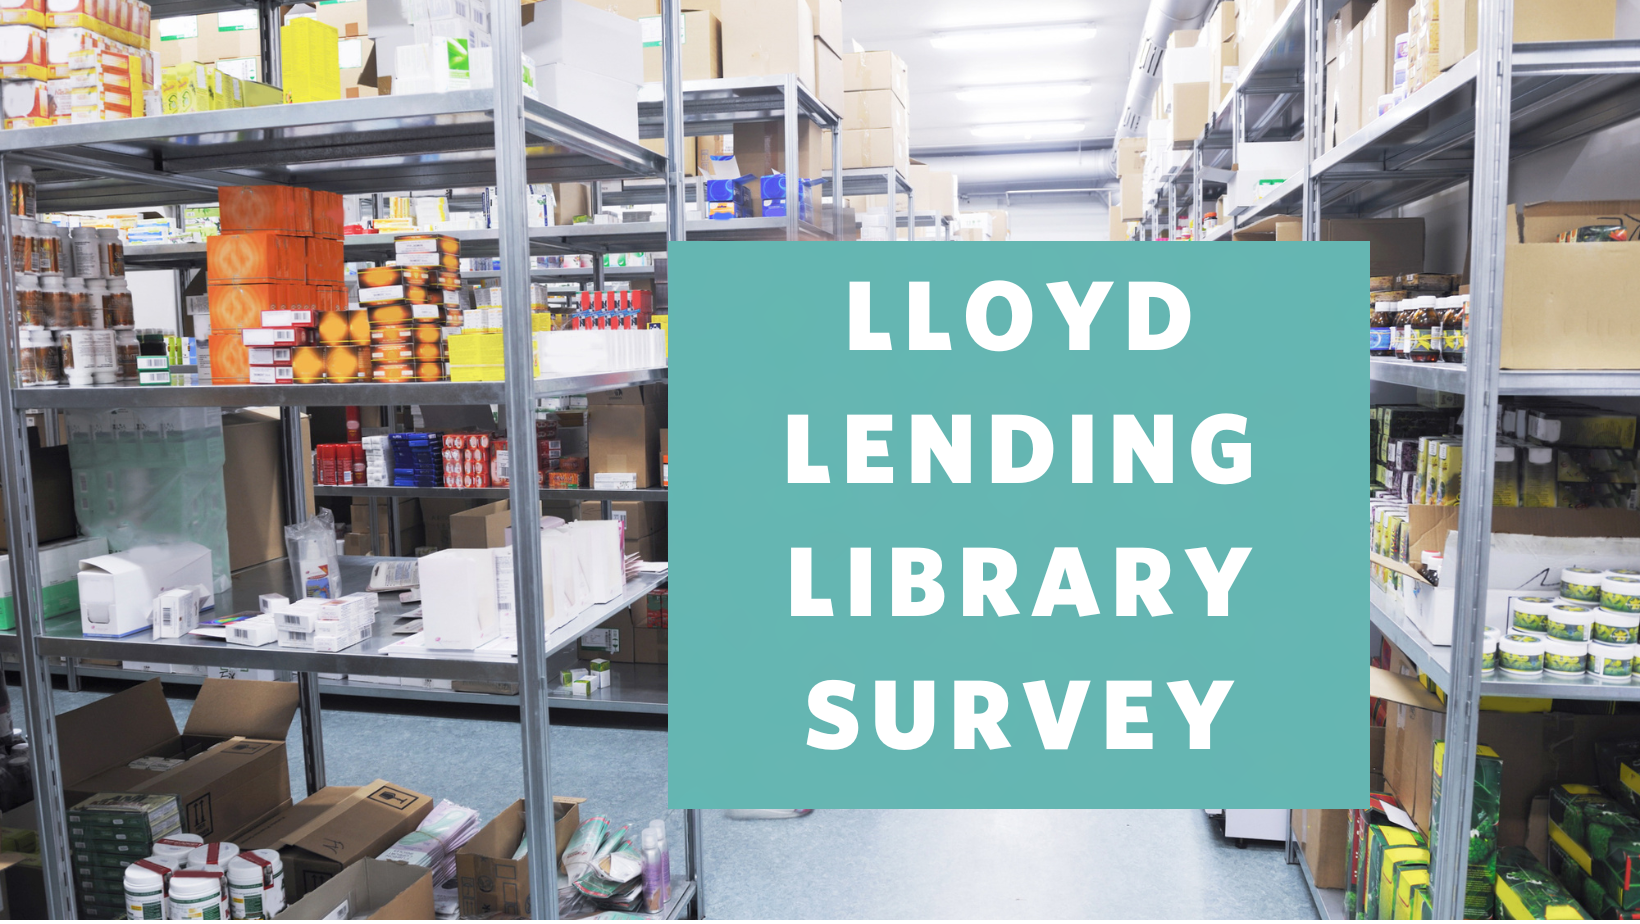 a photo of a storage room with materials on metal racks and the words "Lloyd Lending Library Survey"